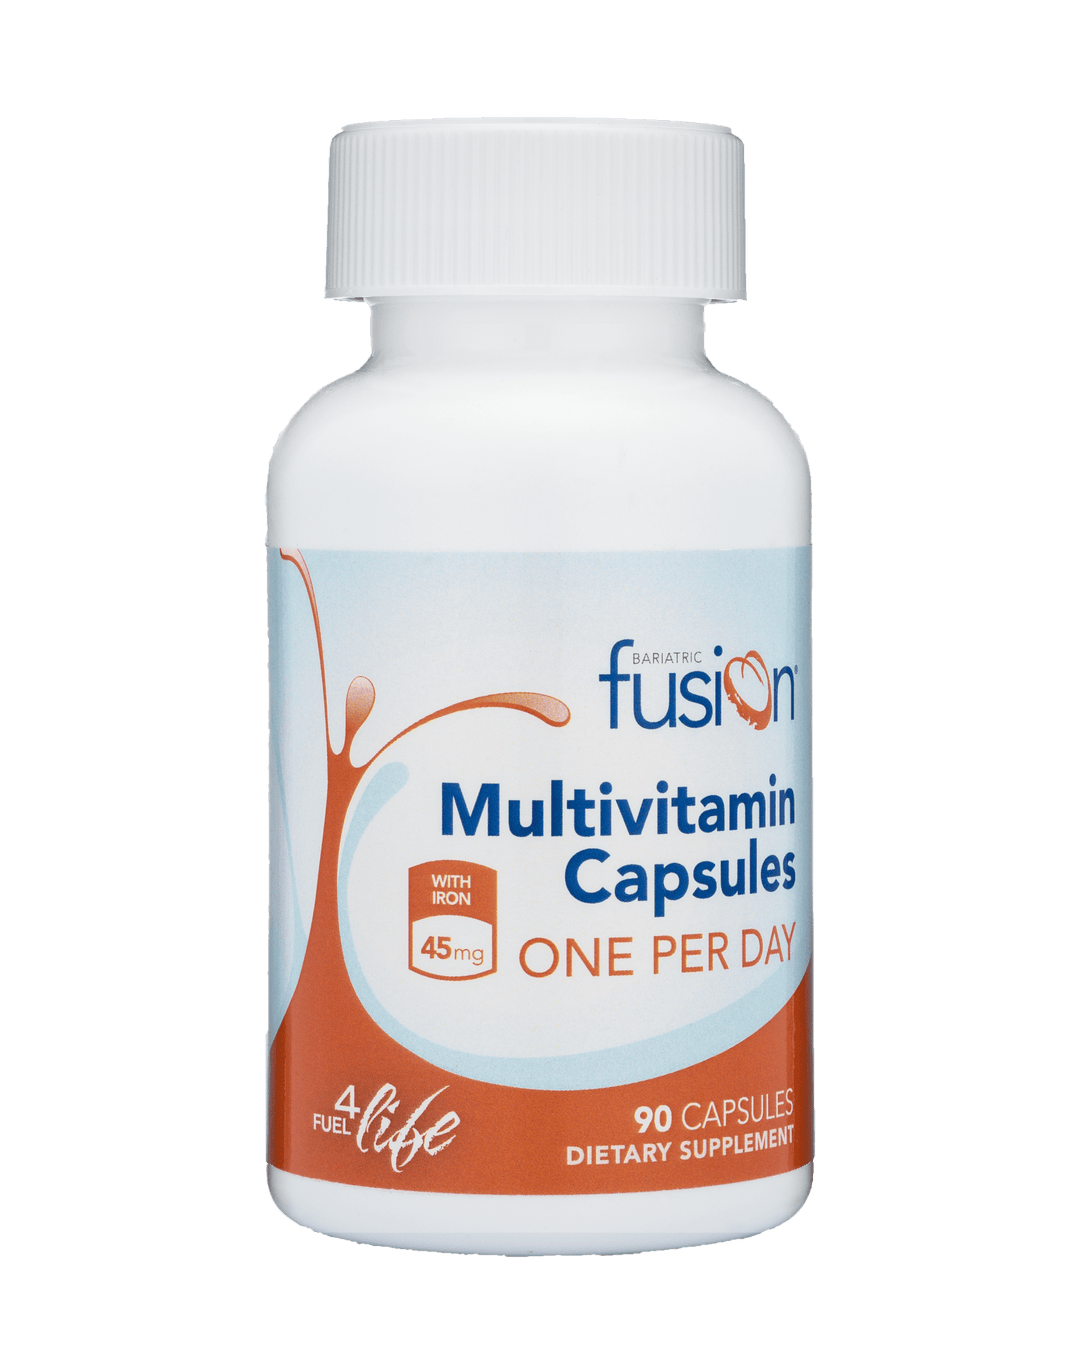 Bariatric Fusion One PER Day Bariatric Multivitamin Capsule With 45mg Iron 90 count bottle